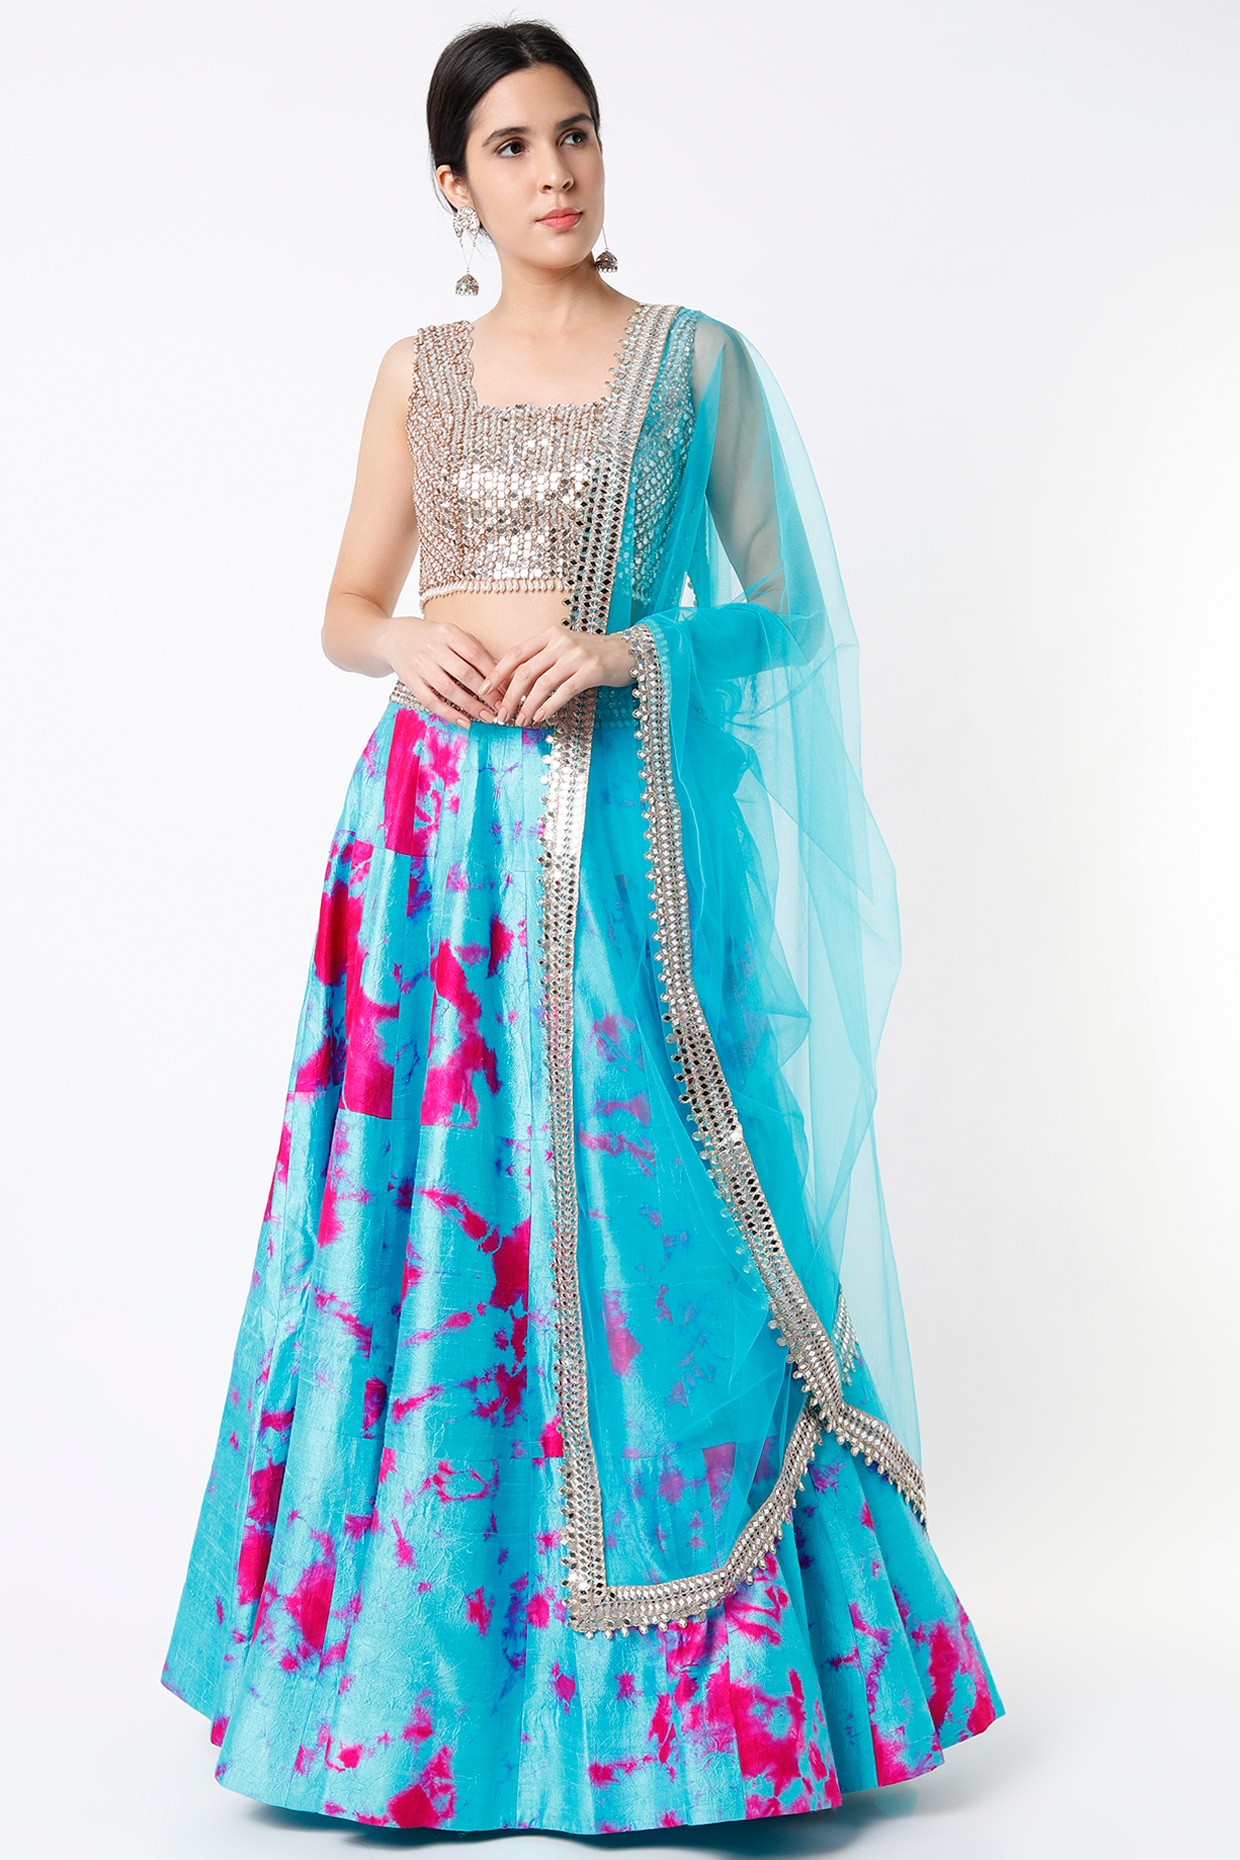 Unstitched Wedding Wear Turquoise Attractive Lehenga Choli With Embroidery  at Rs 2200 in Surat